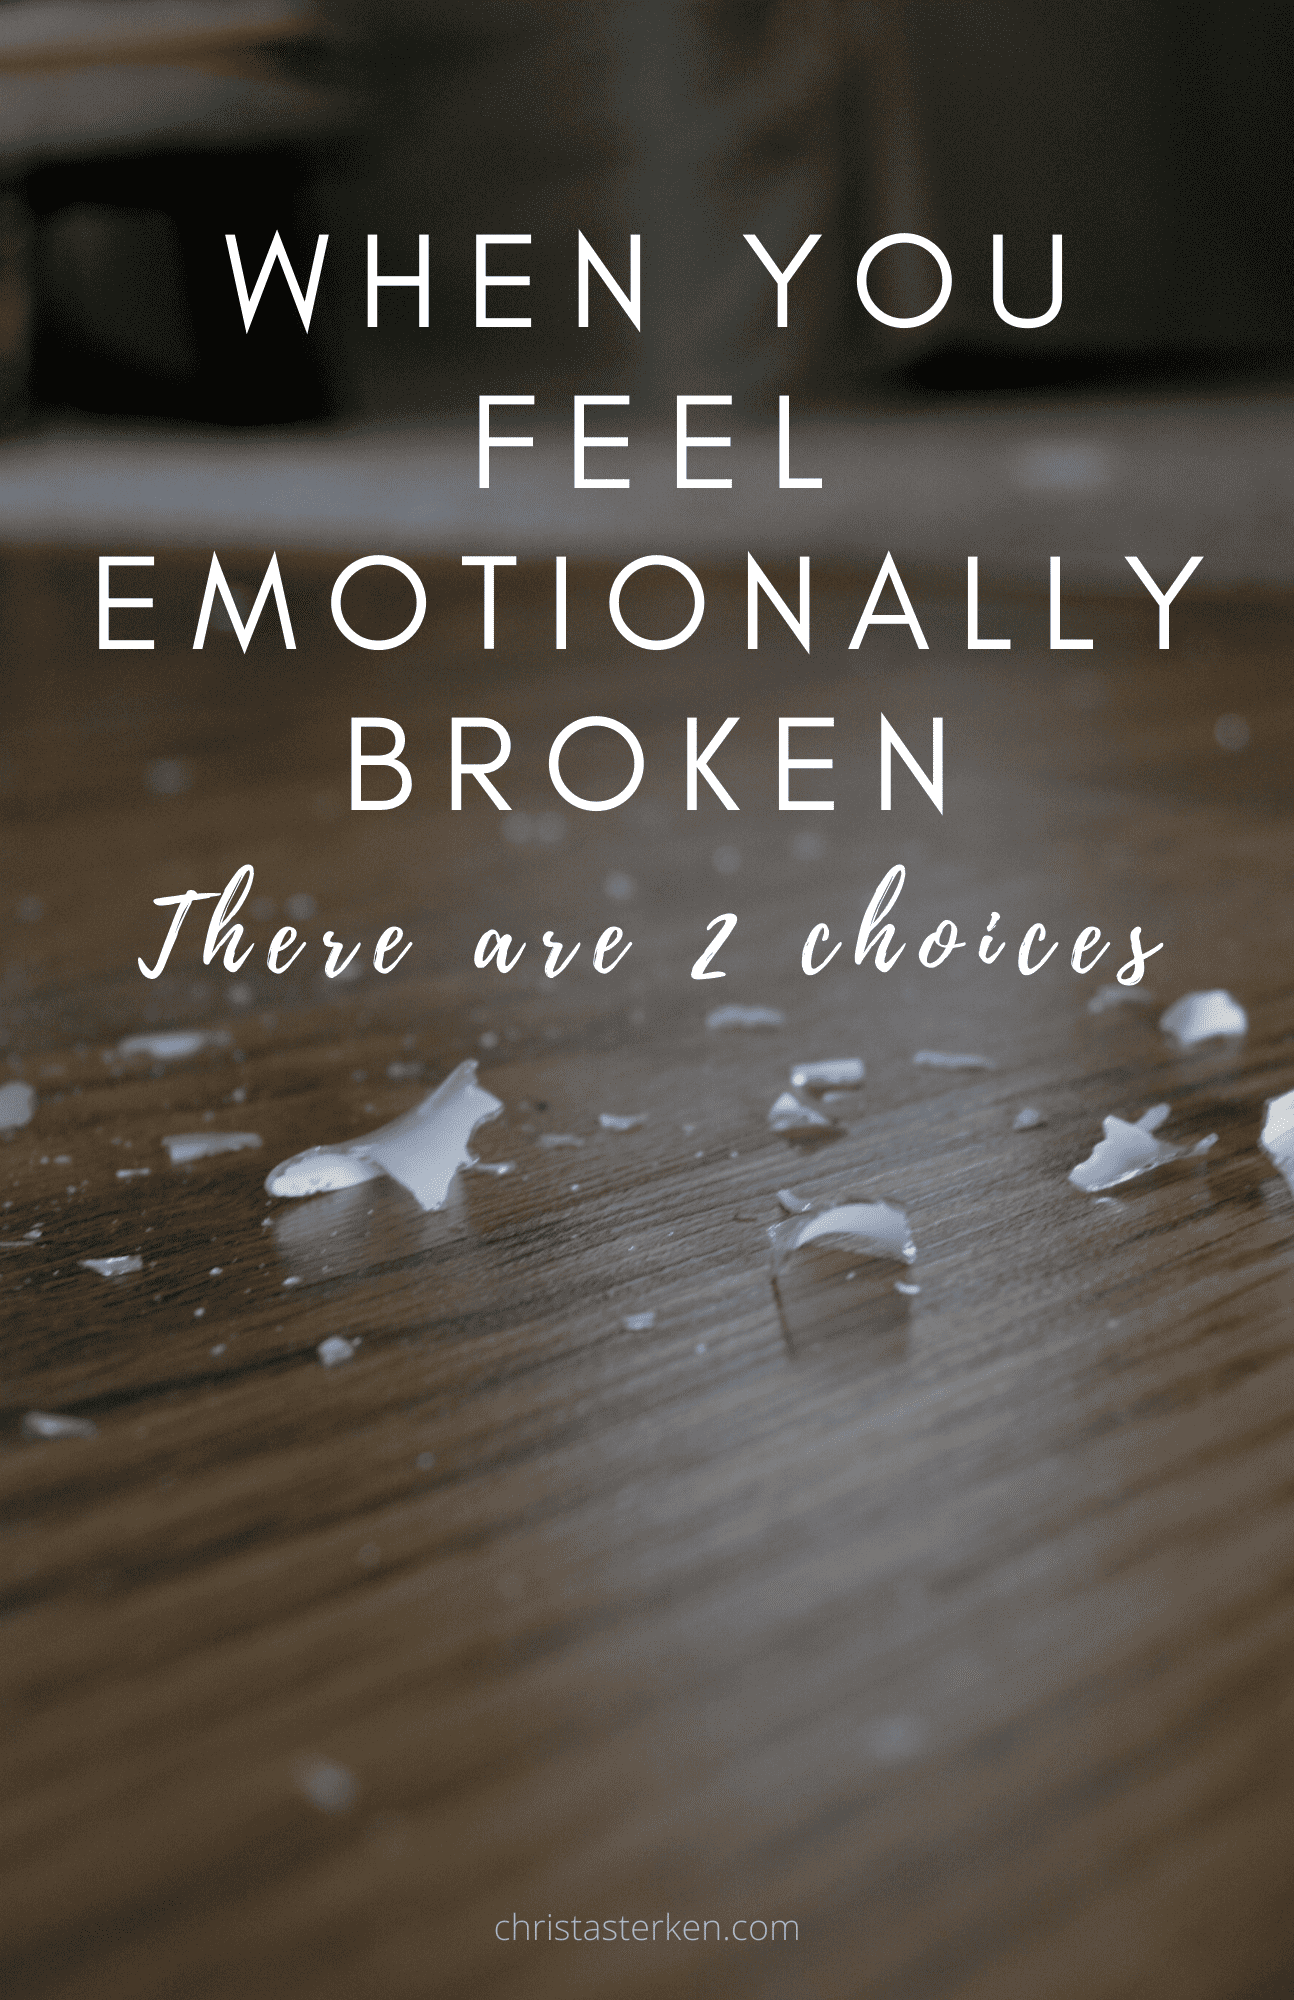 When you are emotionally broken there are 2 choices